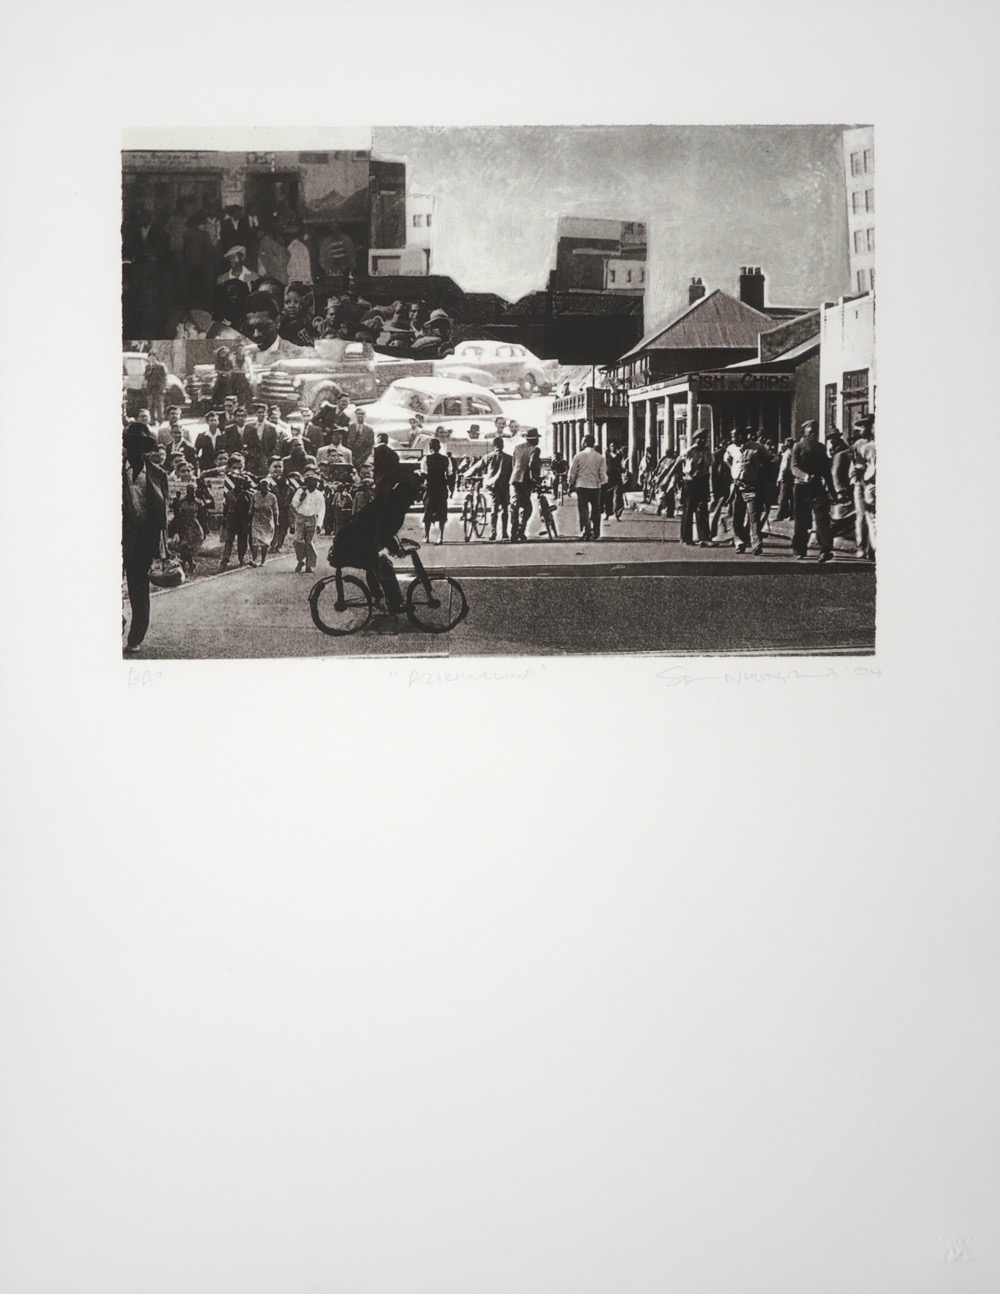 collaged image from multiple photographs of a crowded city scene with people in the foreground